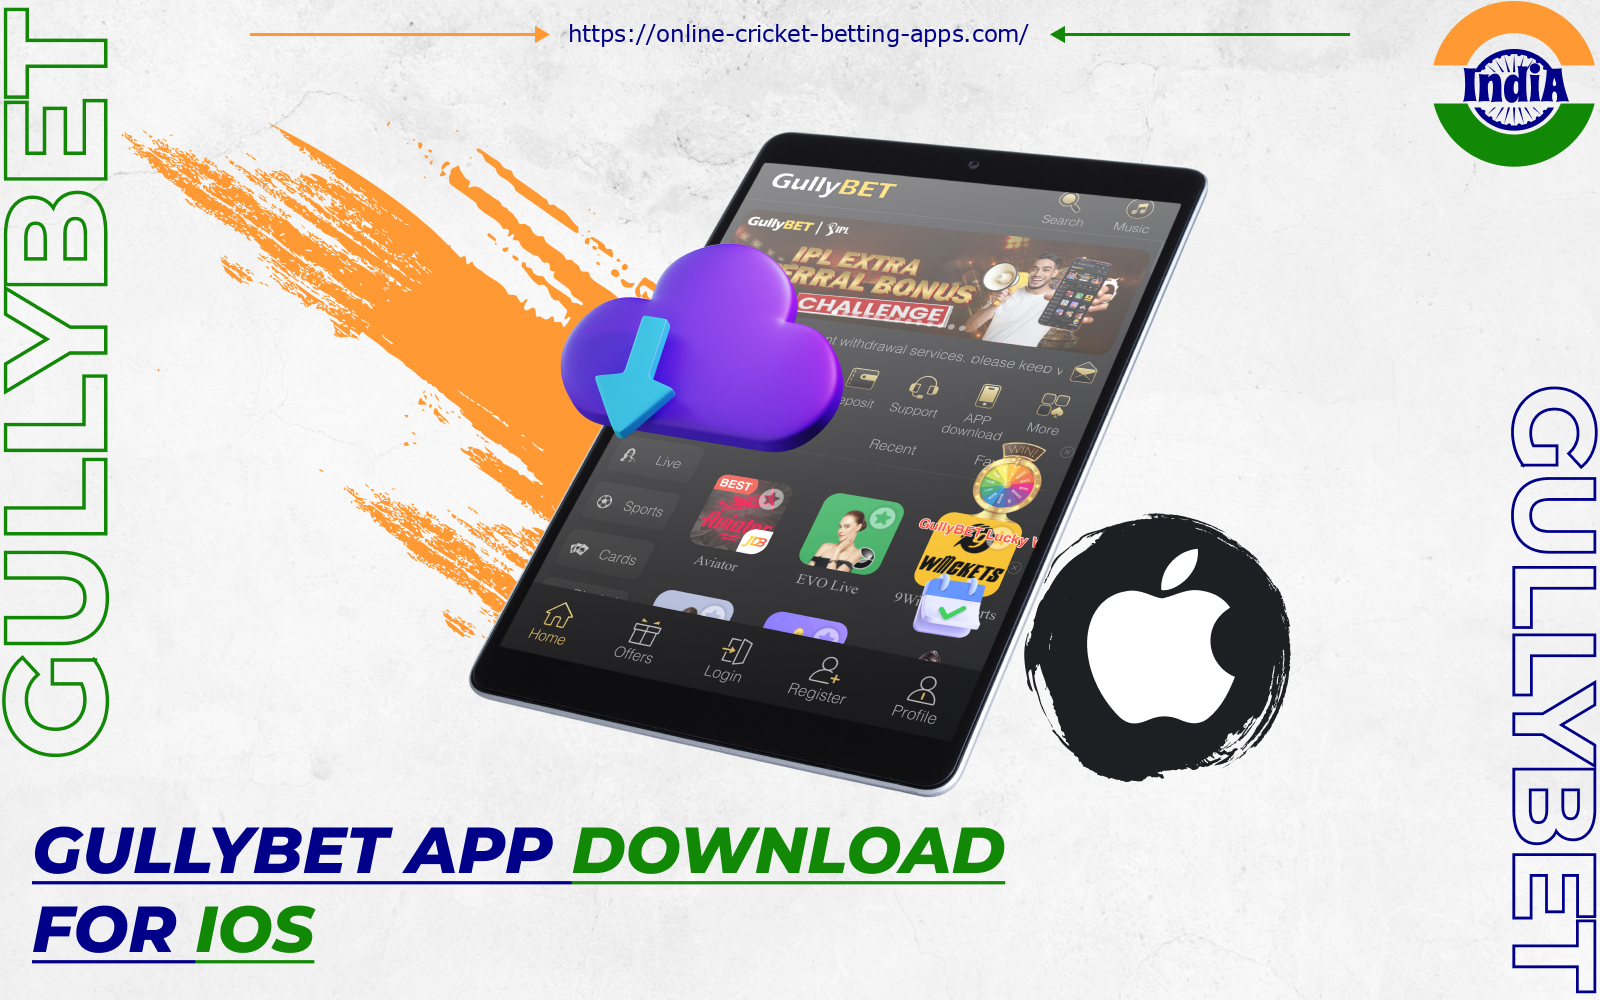 After installing the GullyBet app on iOS, players from India will be able to bet on sports and play casino games